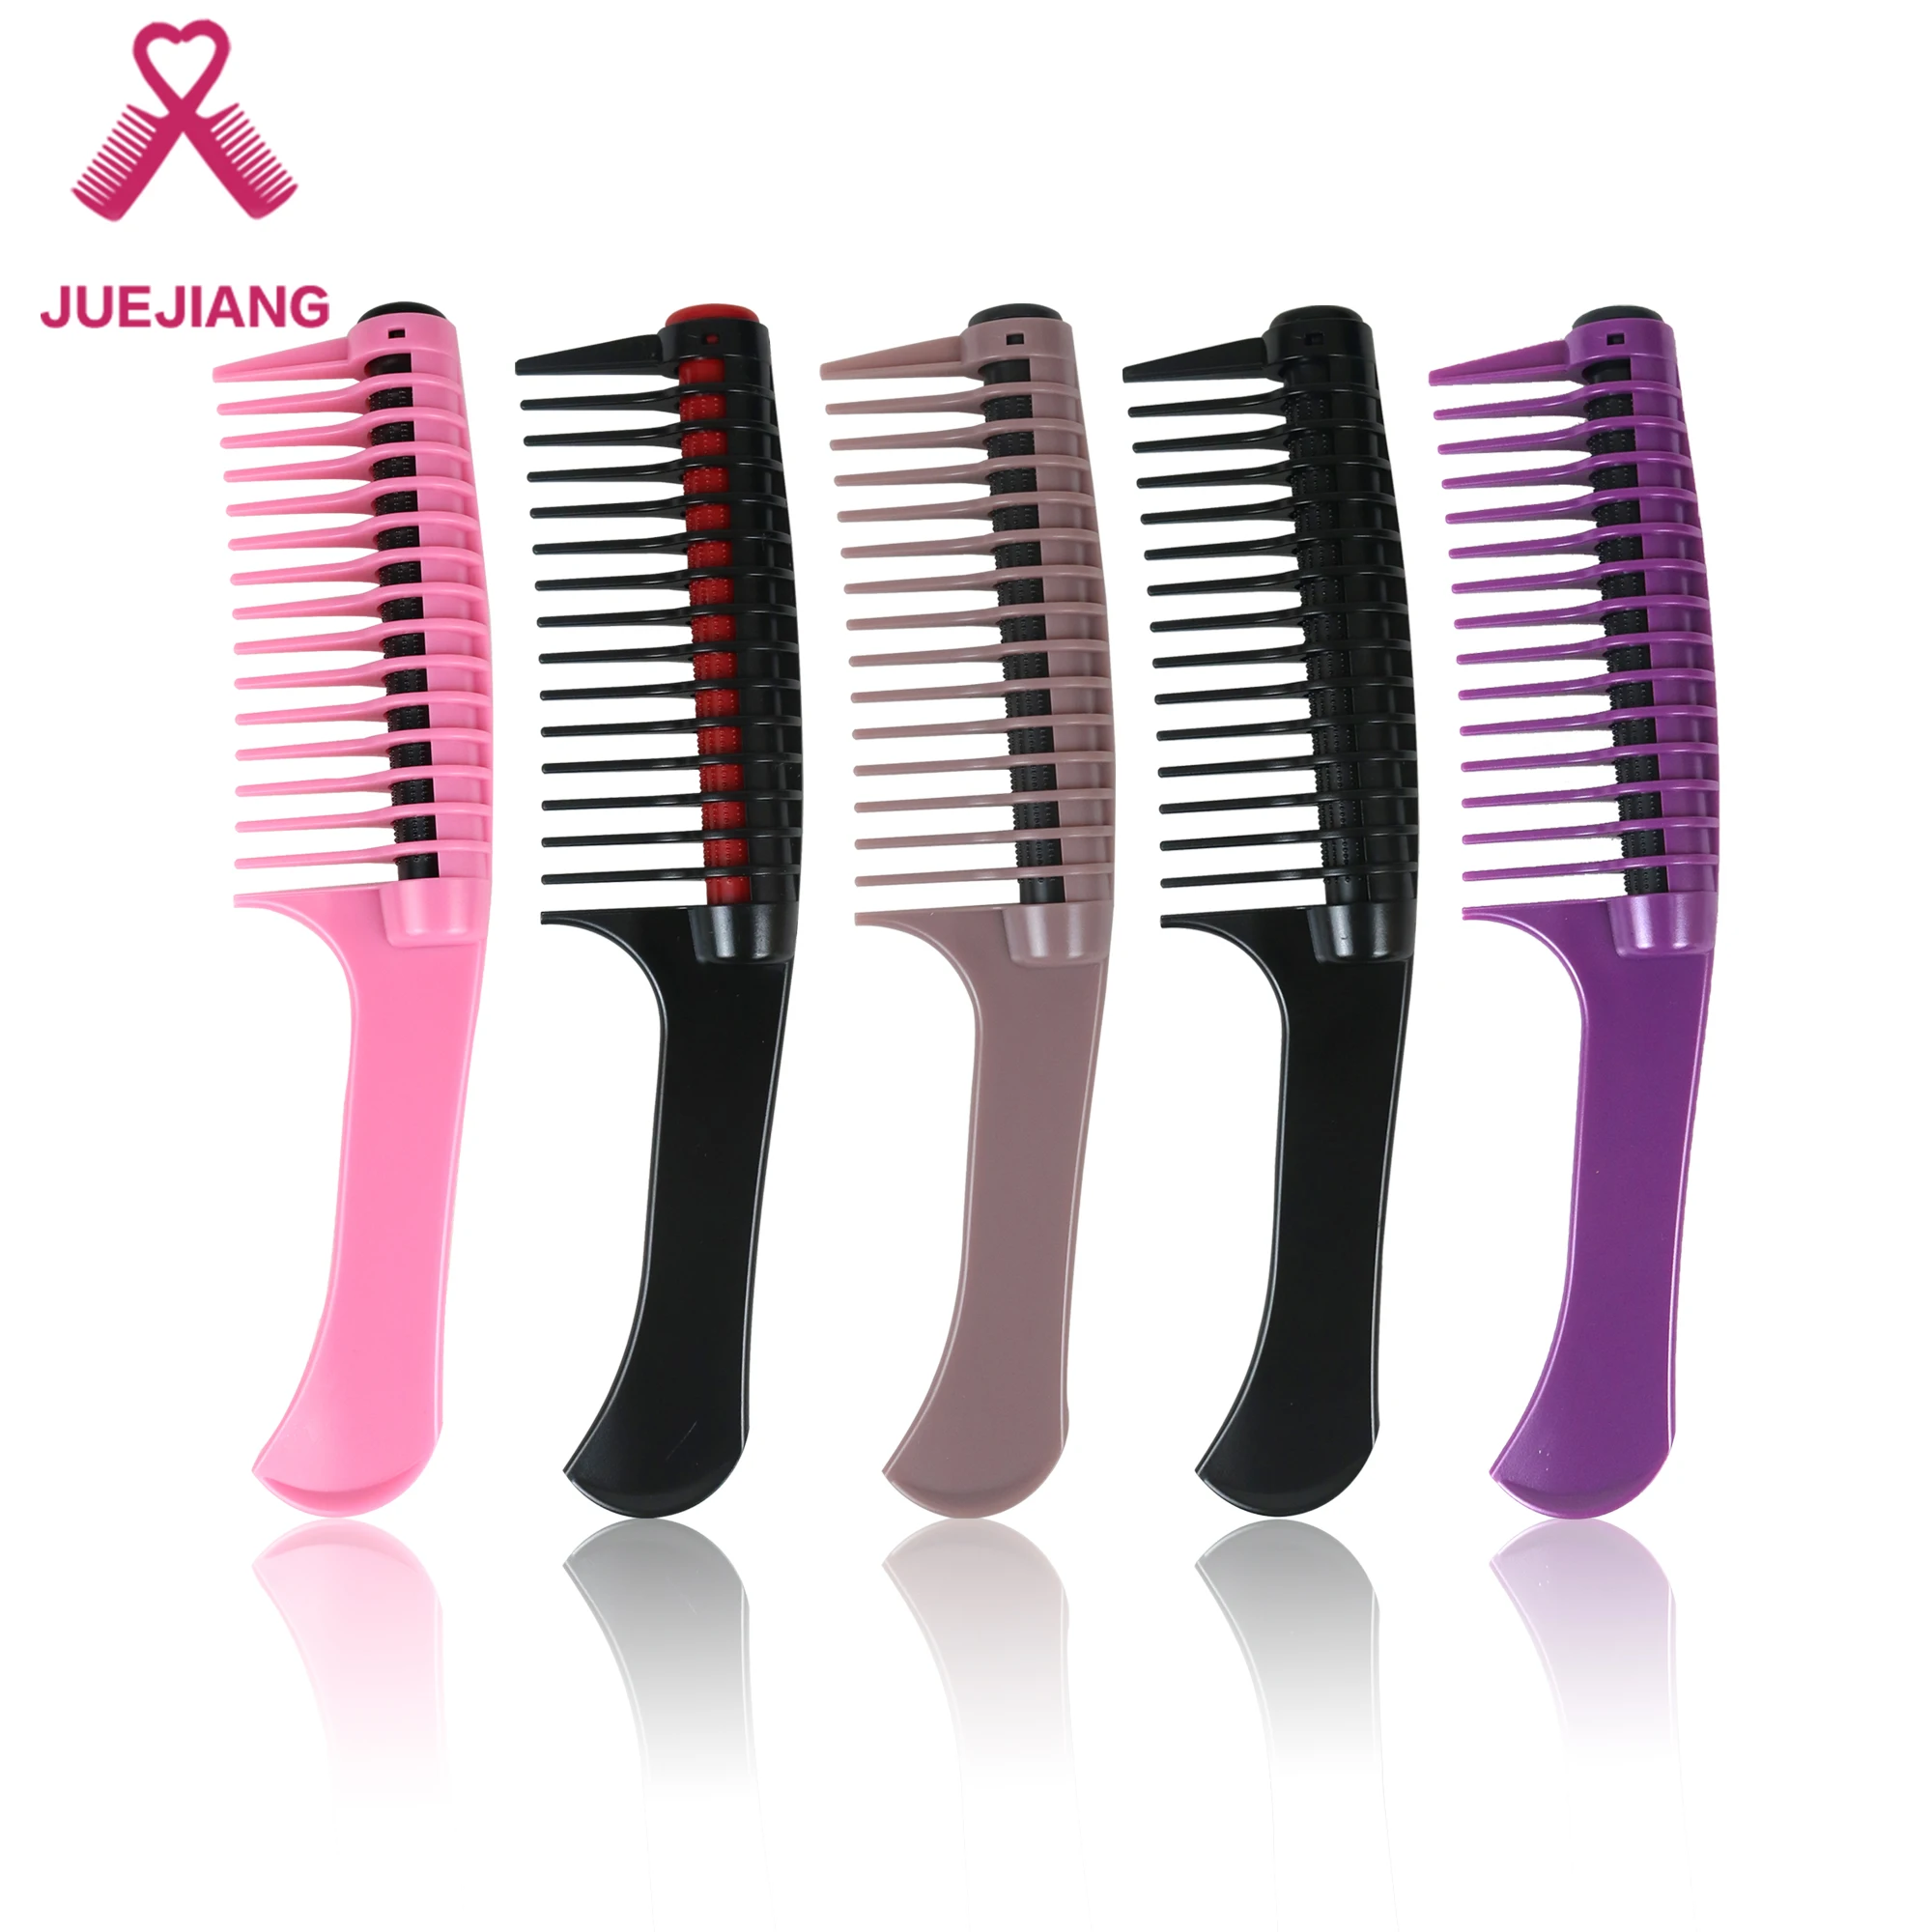 

Super Styling Hairdressing Large Tooth Comb With Oiled Tools Roller Comb Anti-tie Detangle Knot Hair Weaving, Customized